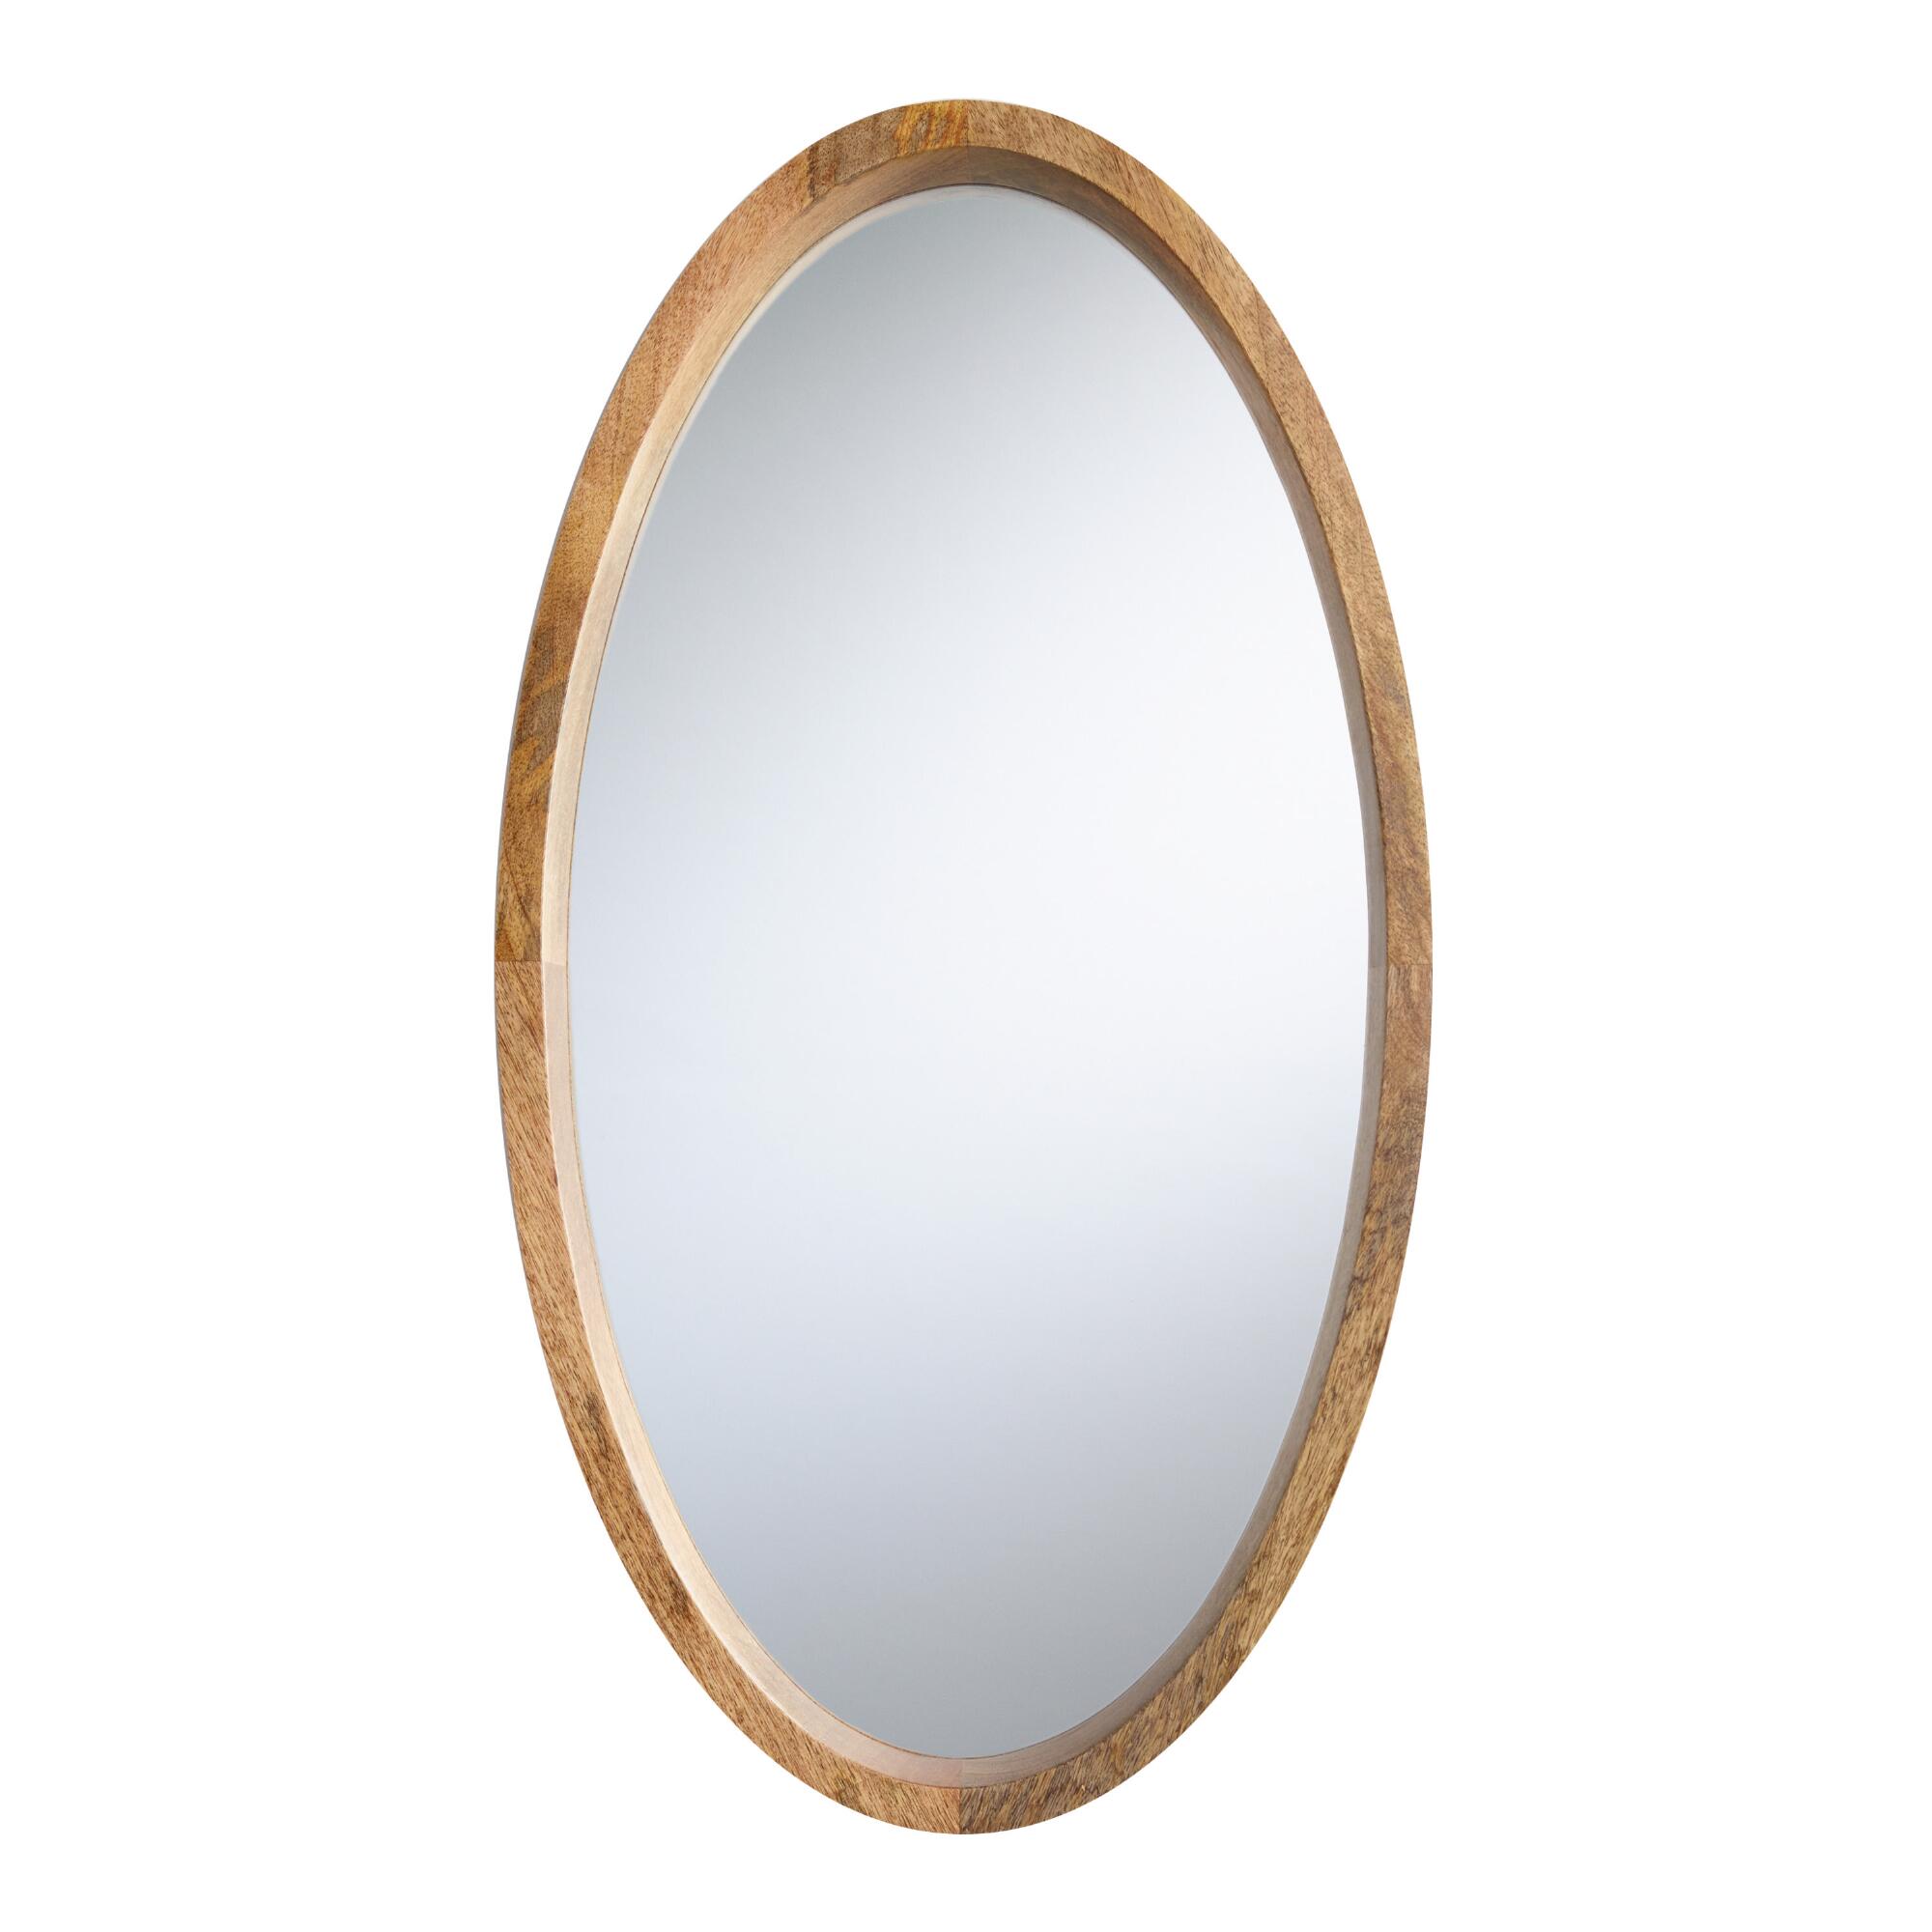 Oval Natural Wood Evan Mirror by World Market